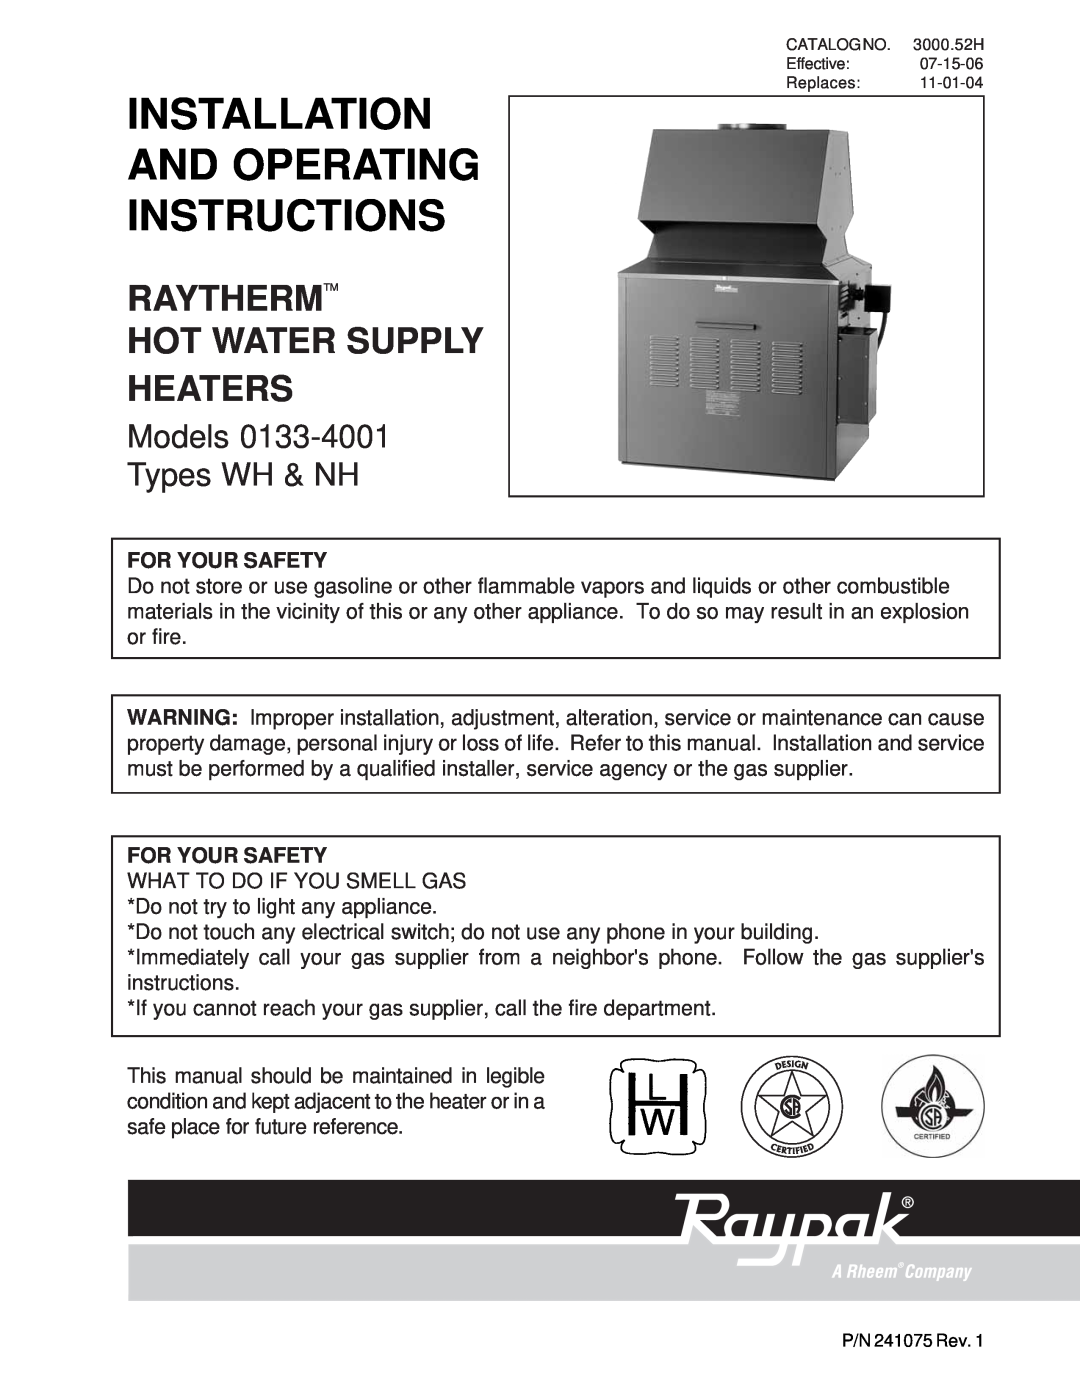 Raypak 0133-4001 manual For Your Safety, Installation And Operating Instructions, Raythermtm Hot Water Supply Heaters 